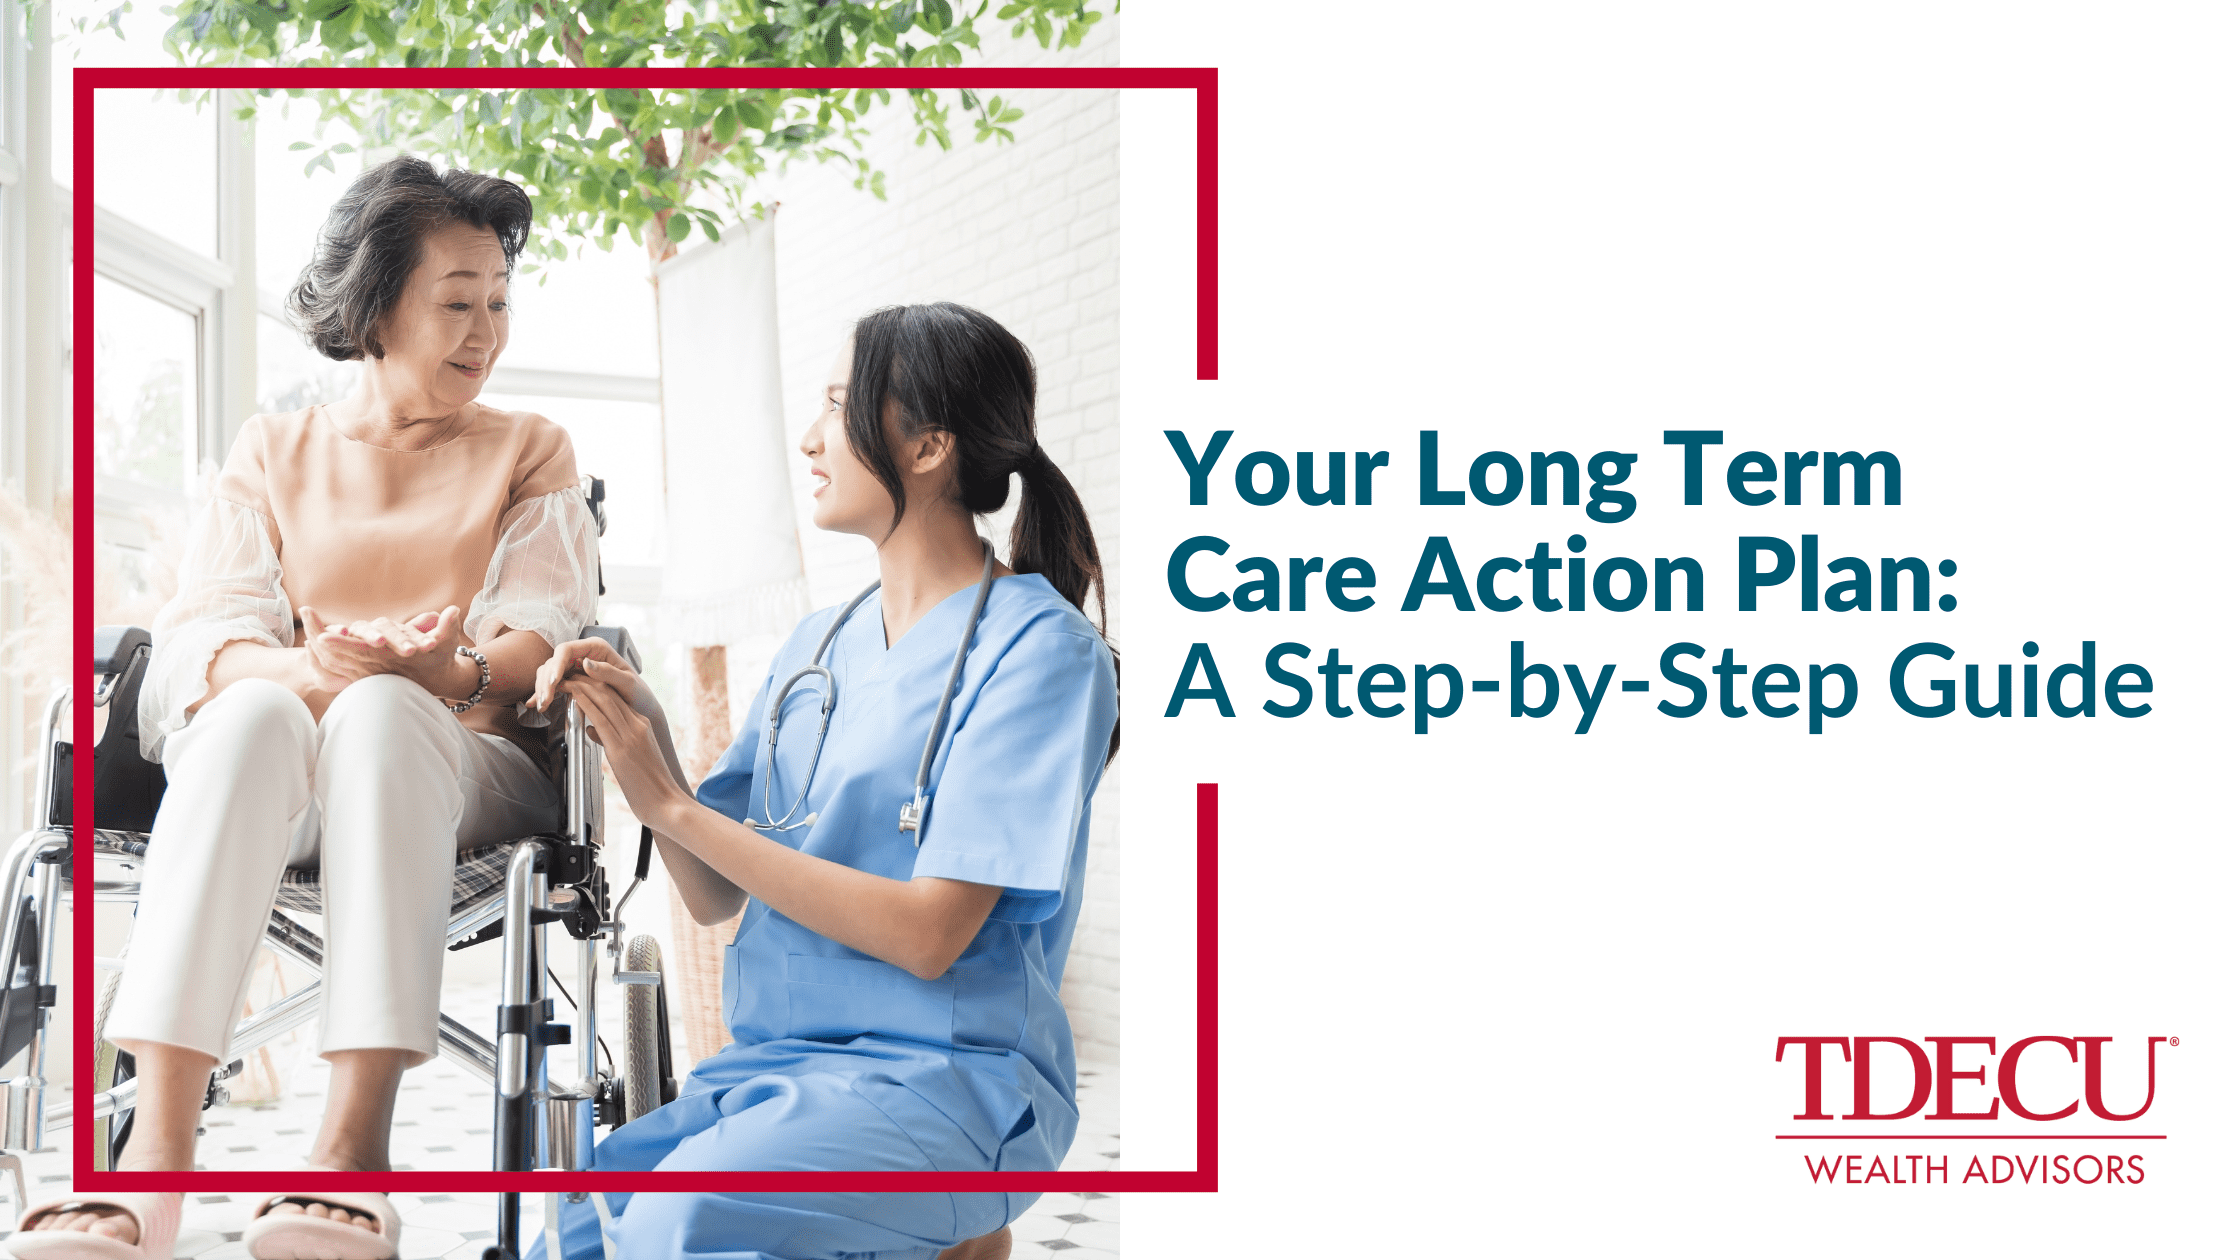 Your Long Term Care Action Plan: A Step-by-Step Guide